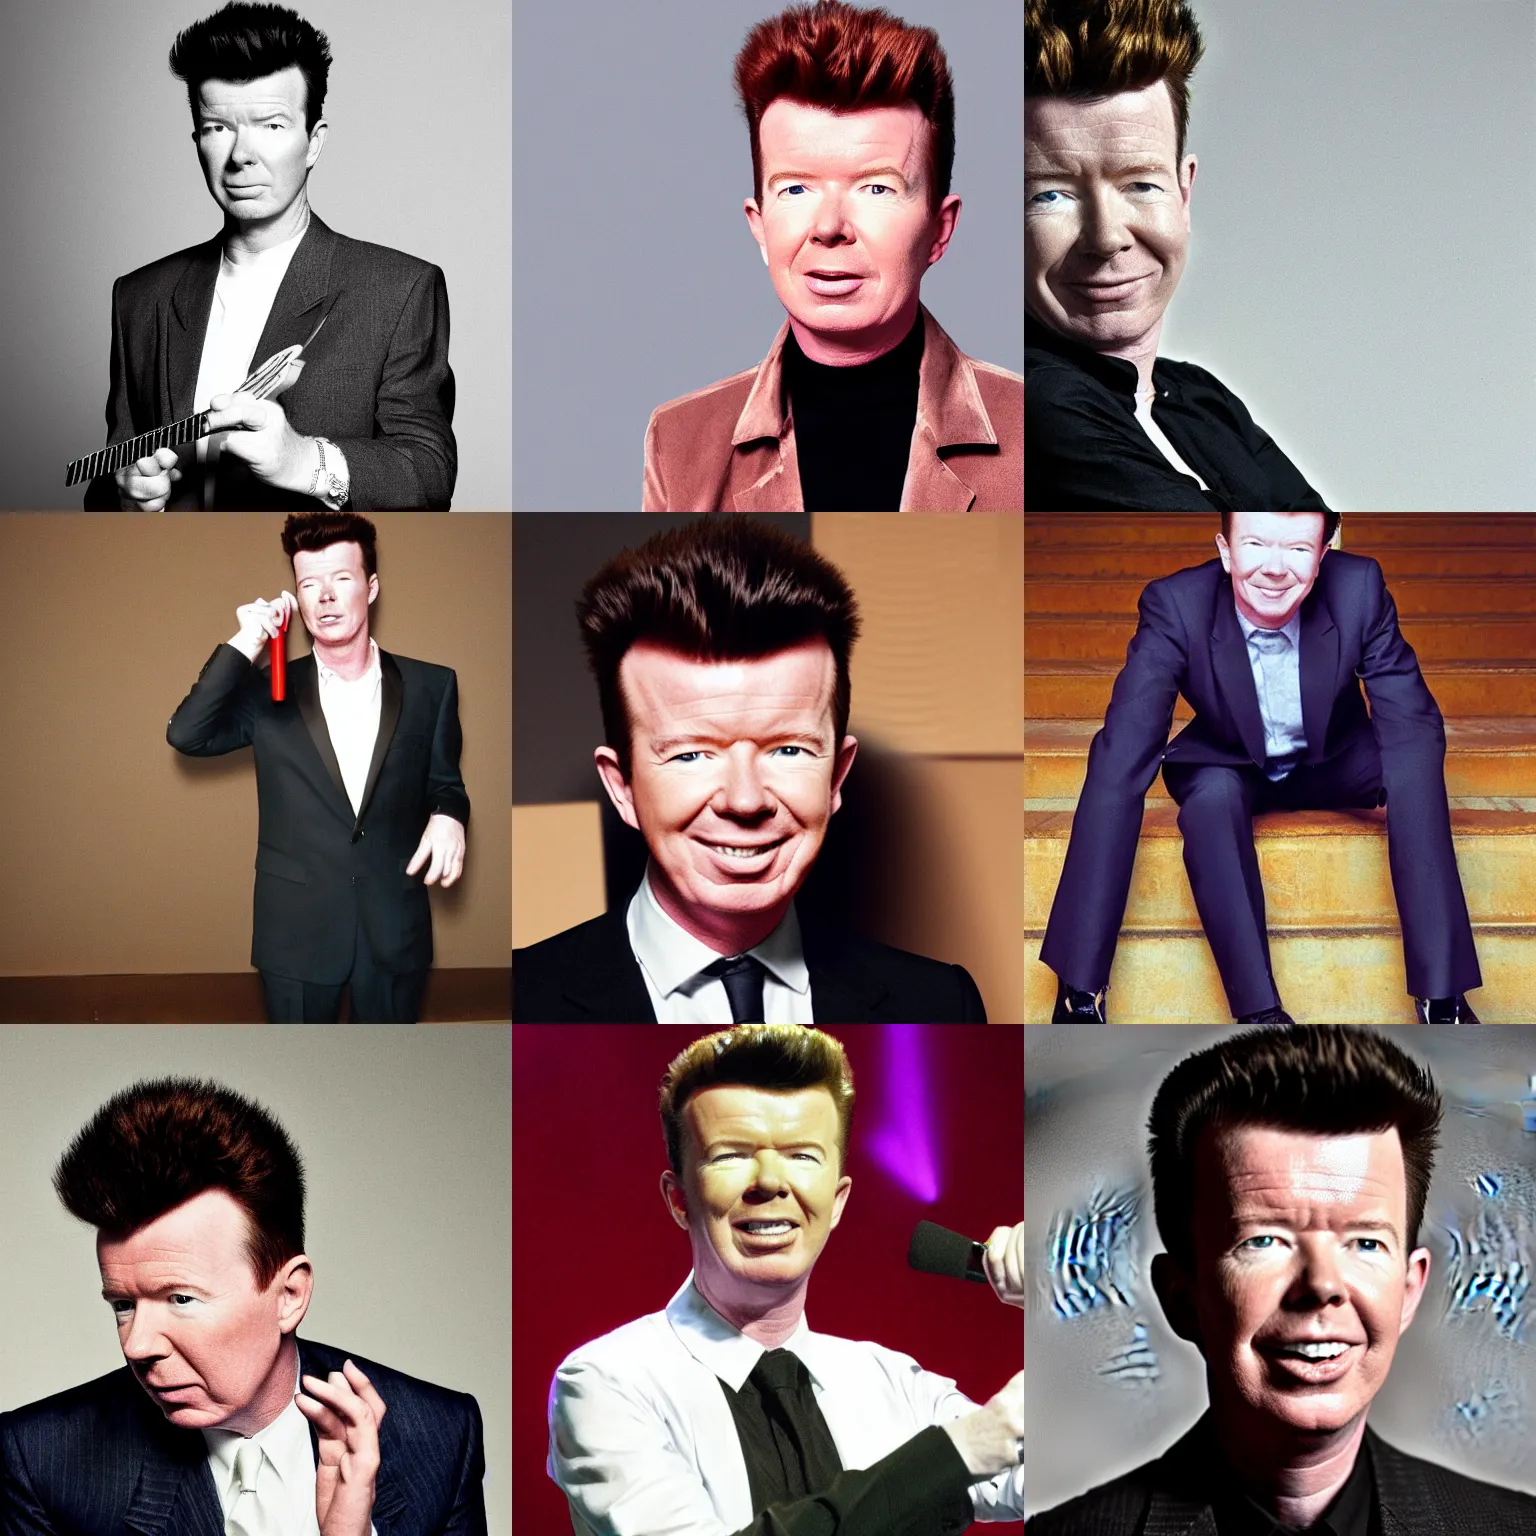 Prompt: Rick Astley letting you down